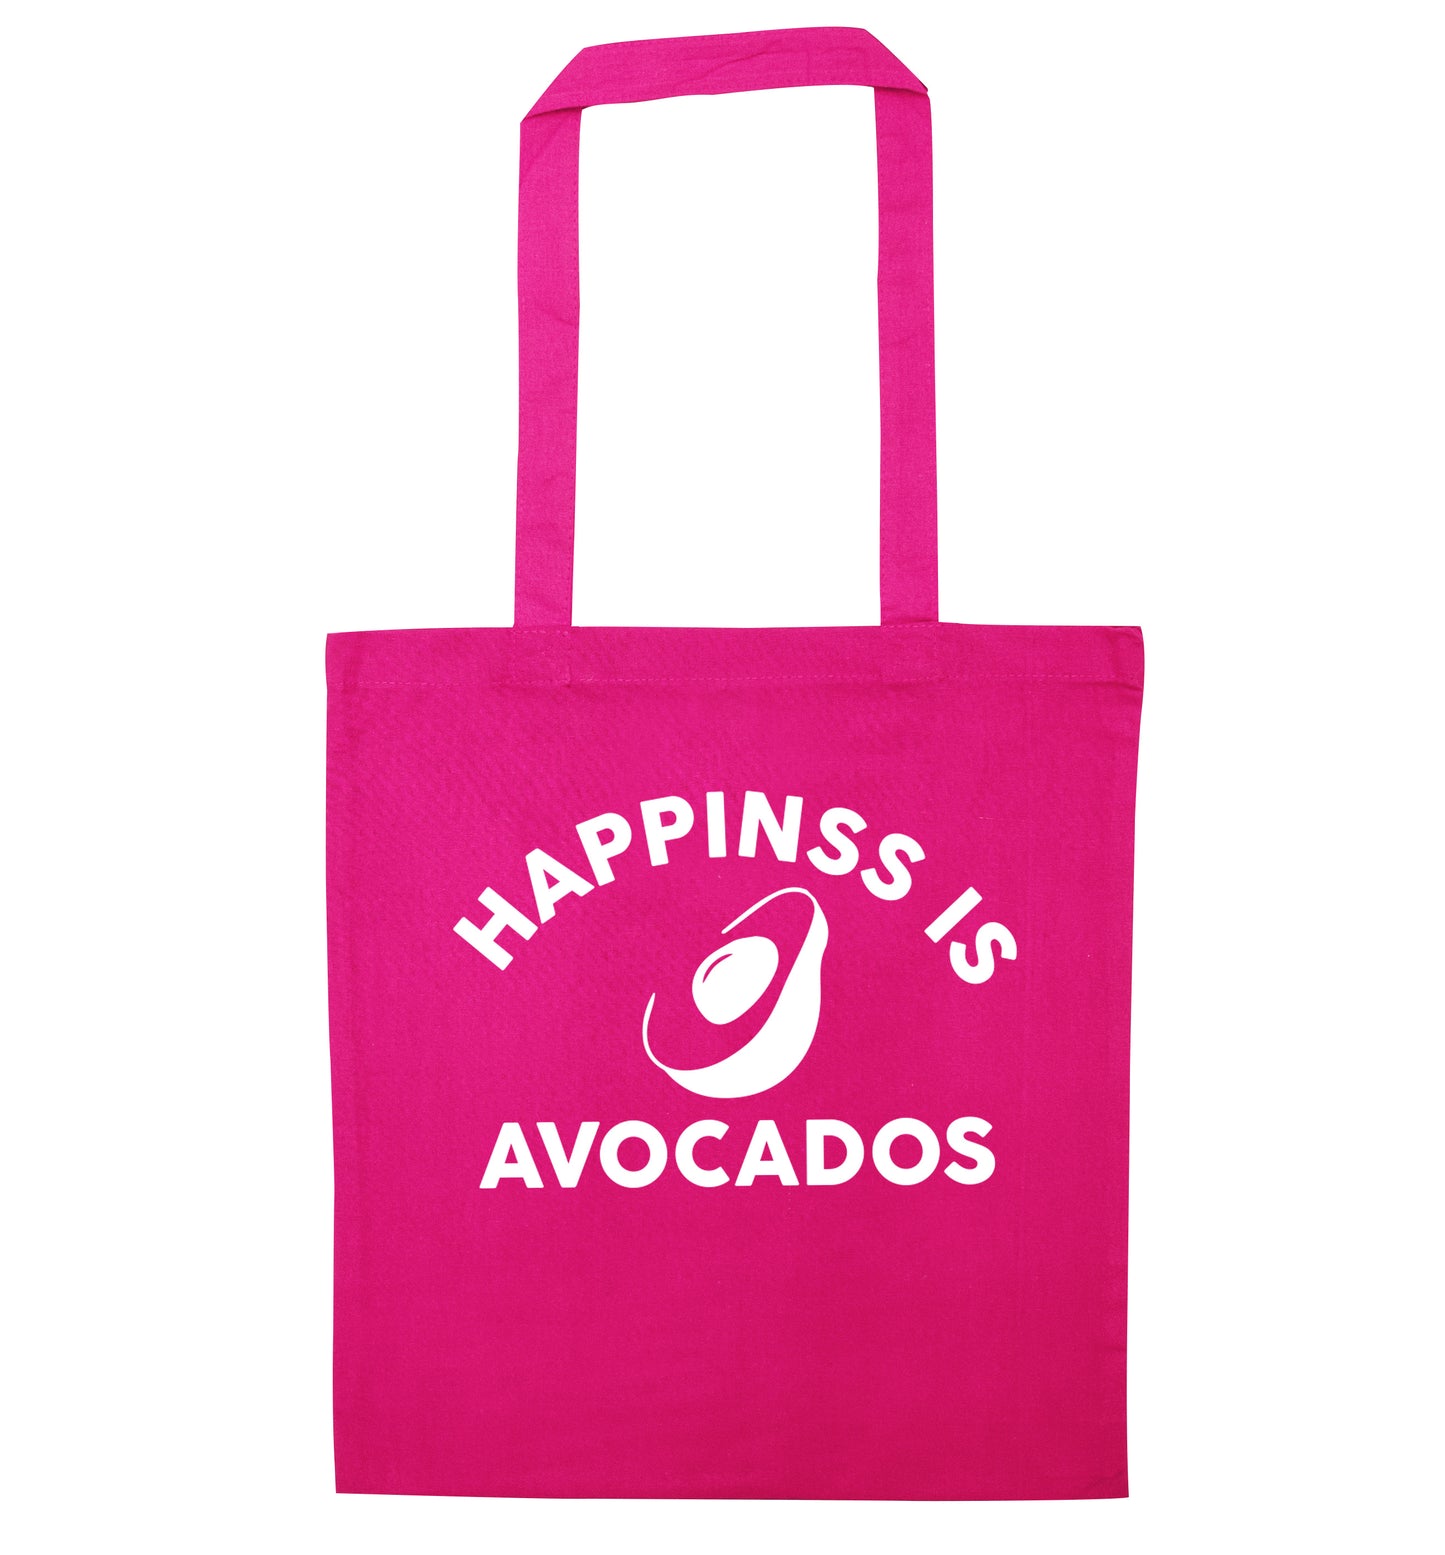 Happiness is avocados pink tote bag